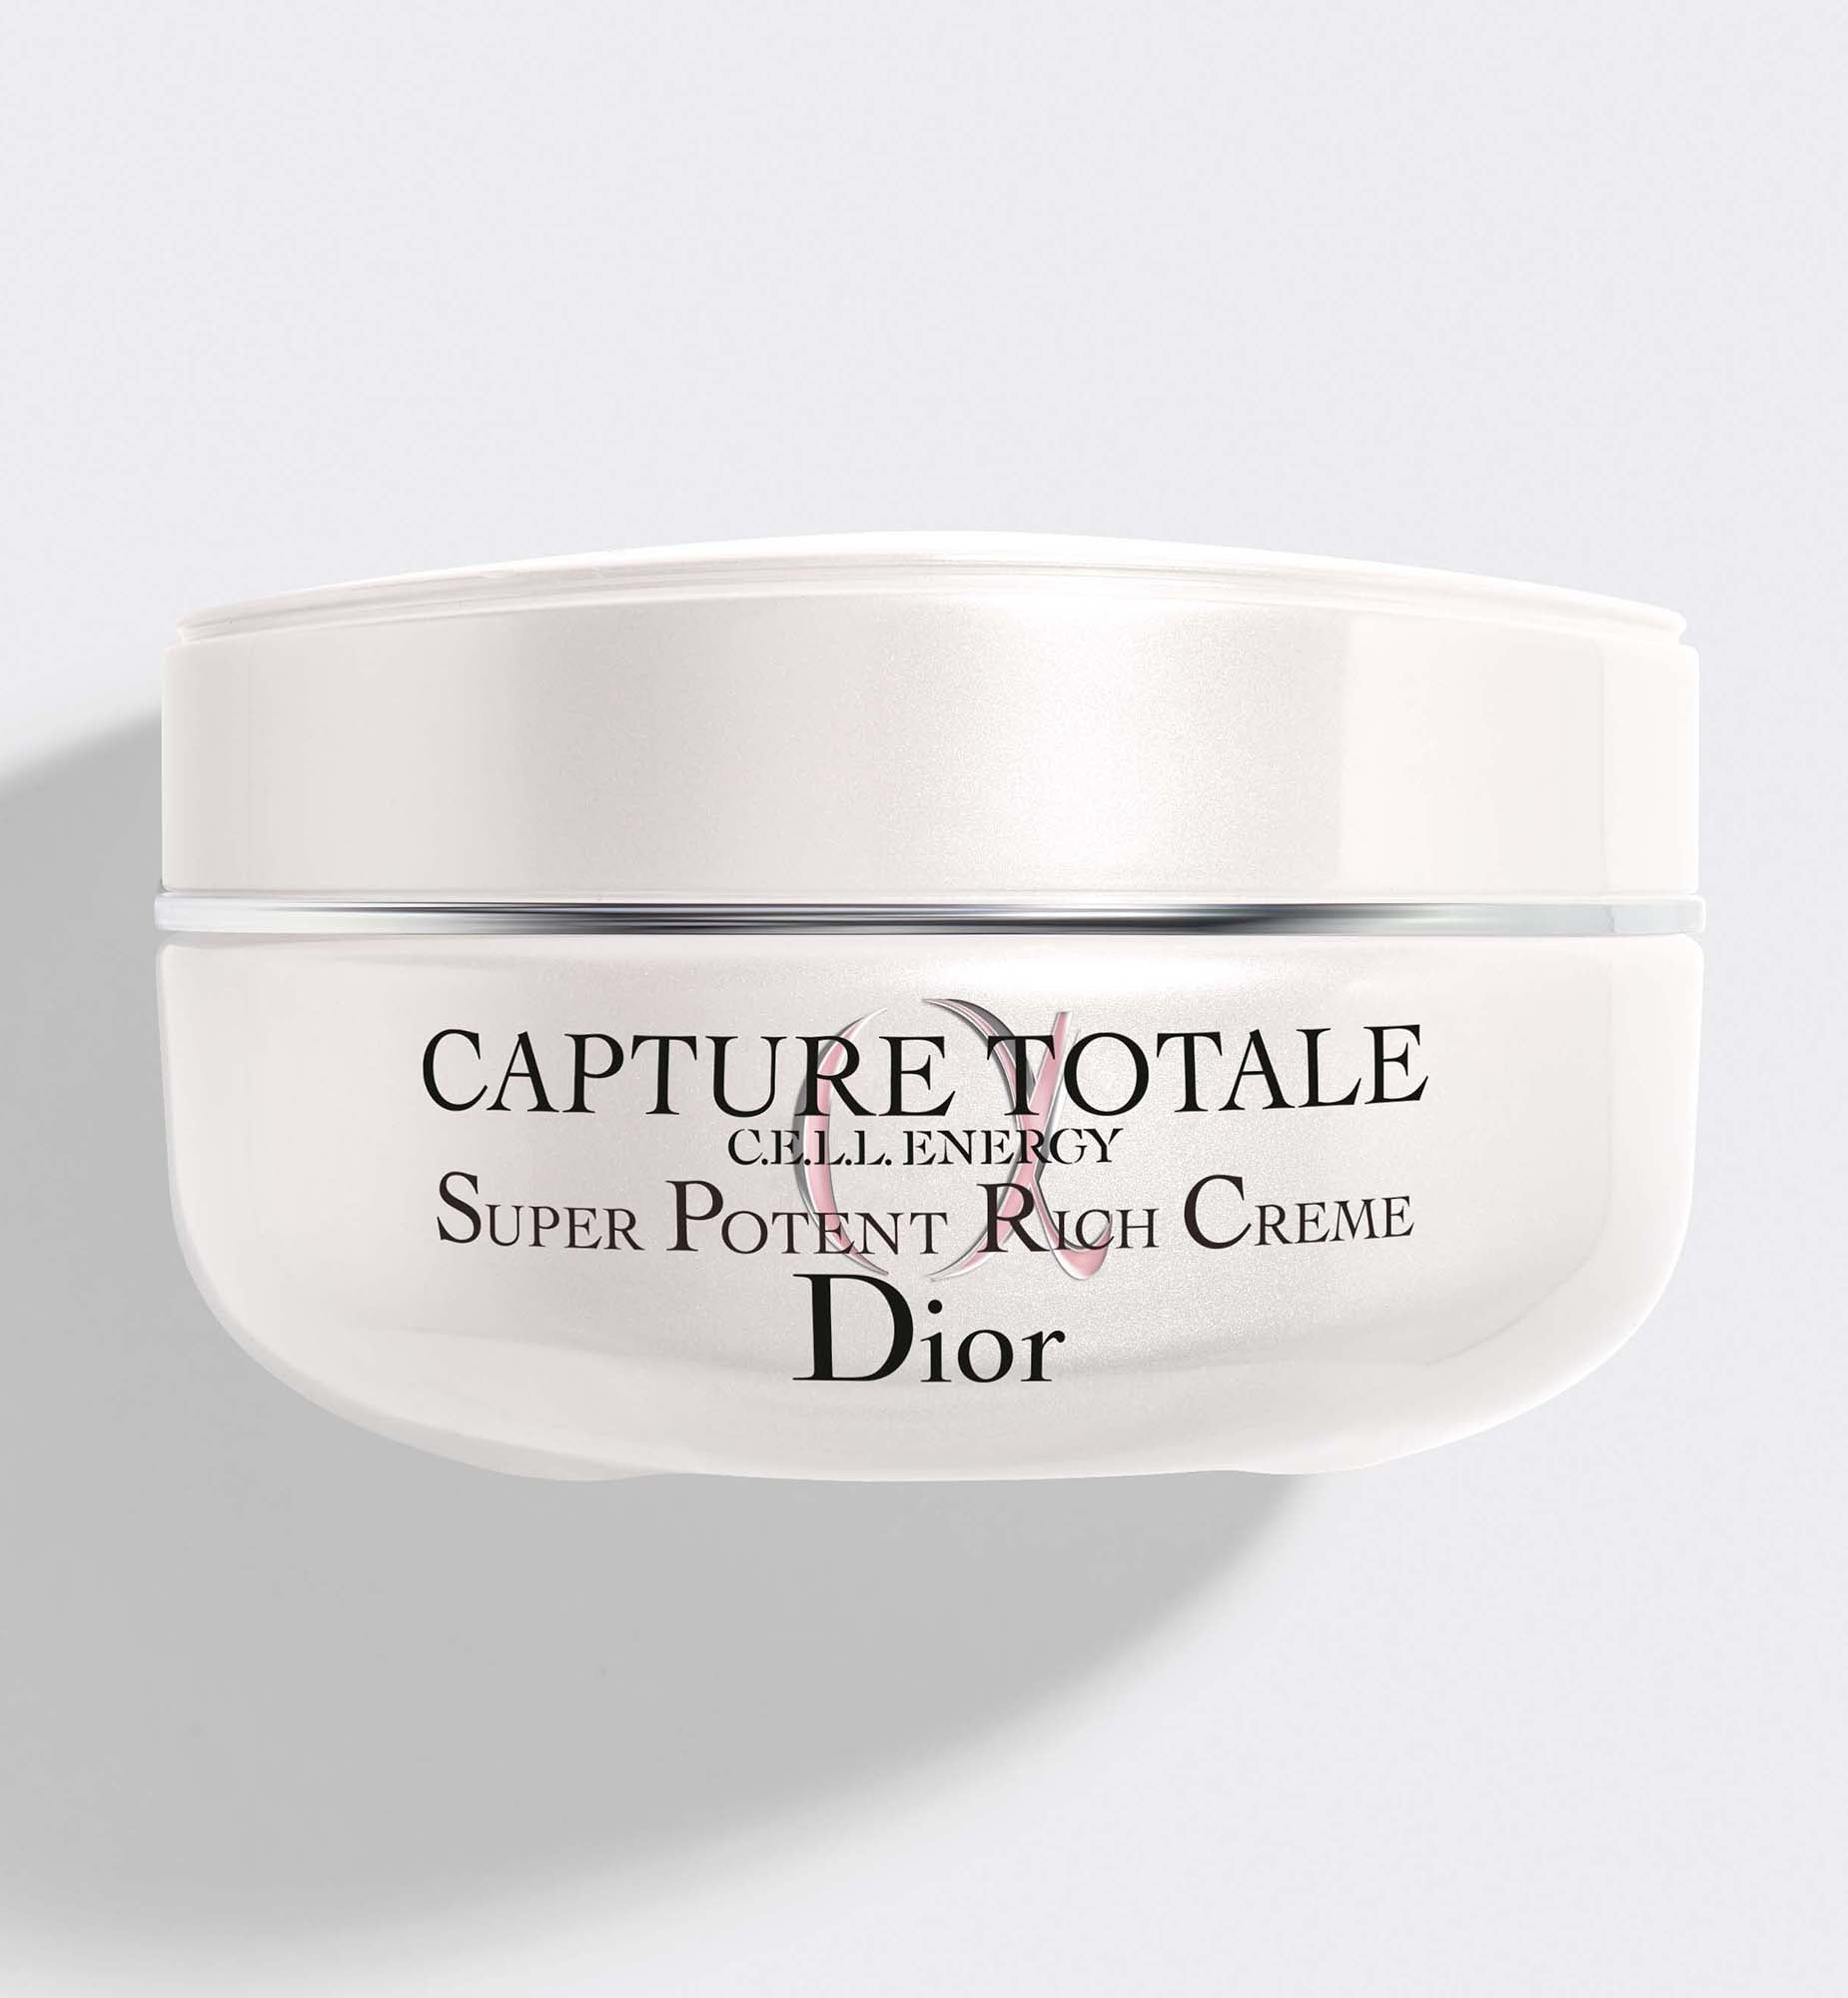 CAPTURE TOTALE | Firming & wrinkle-correcting rich creme